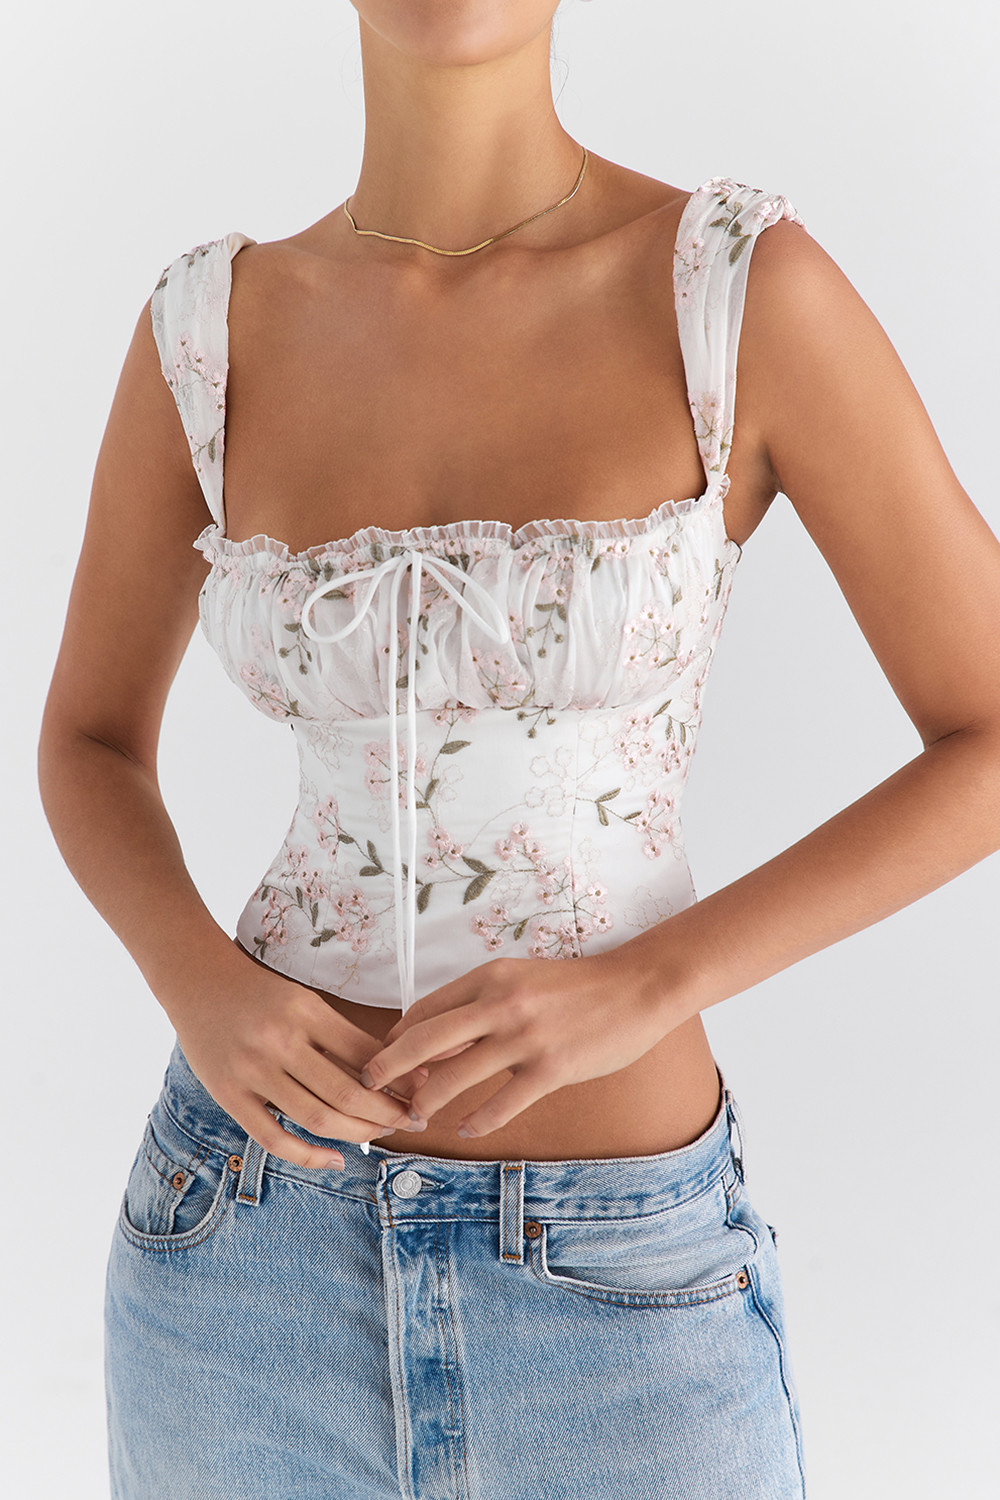 White Embroidered Bustier Top - Mistress Rock